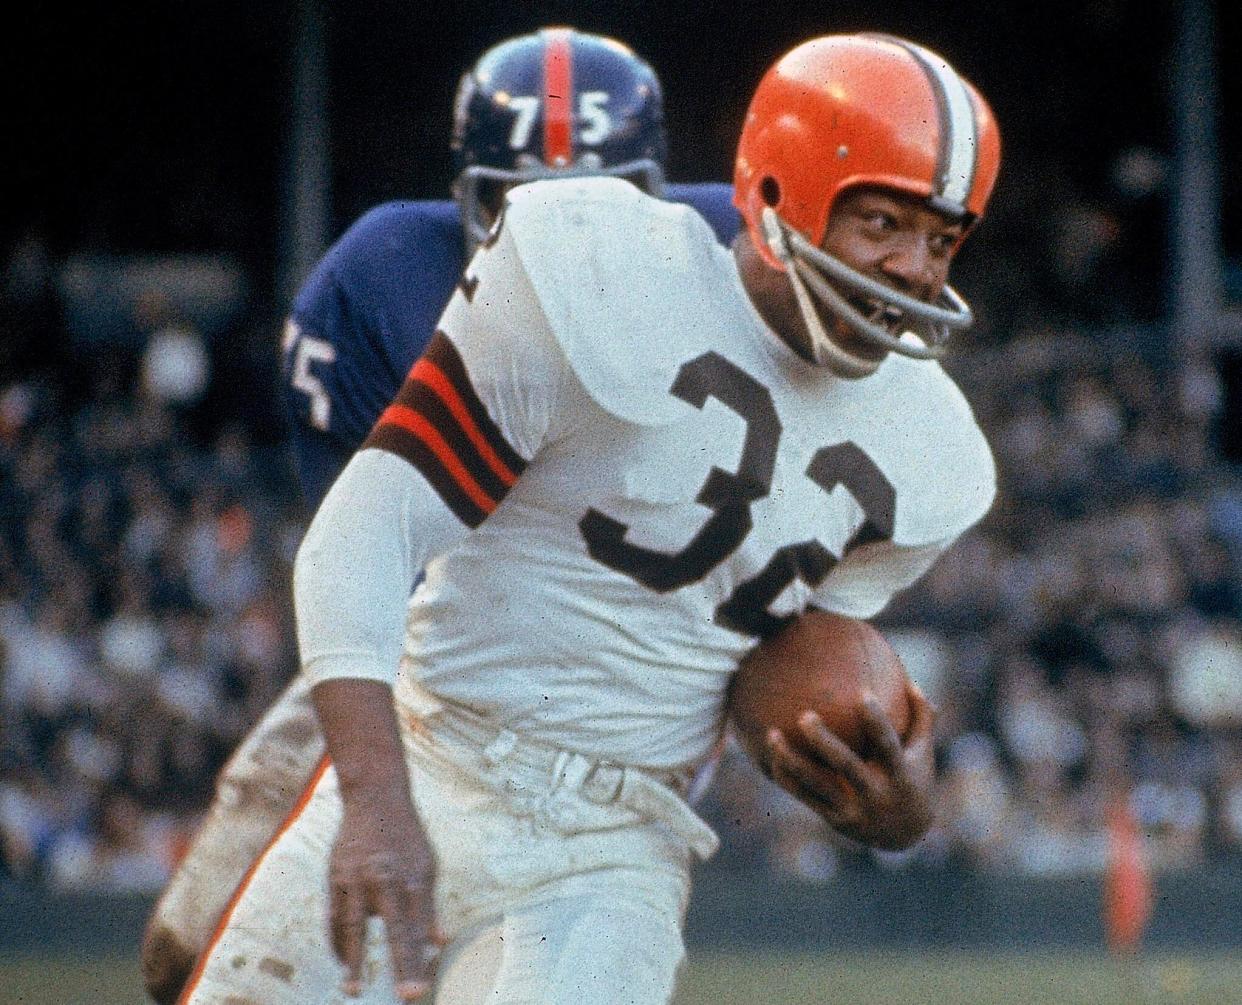 FILE - In this Nov. 14, 1965, file photo, Cleveland Browns running back Jim Brown (32) carries the ball during an NFL football game against the New York Giants in Cleveland. Jim Brown. Period. Arguably the greatest player in NFL history was picked by the Browns with the No. 6 overall pick in 1957. Brown rushed for 12,312 yards in nine seasons, leading the league in eight seasons. The three-time MVP walked away from his career at its peak to pursue acting. (AP Photo/File)